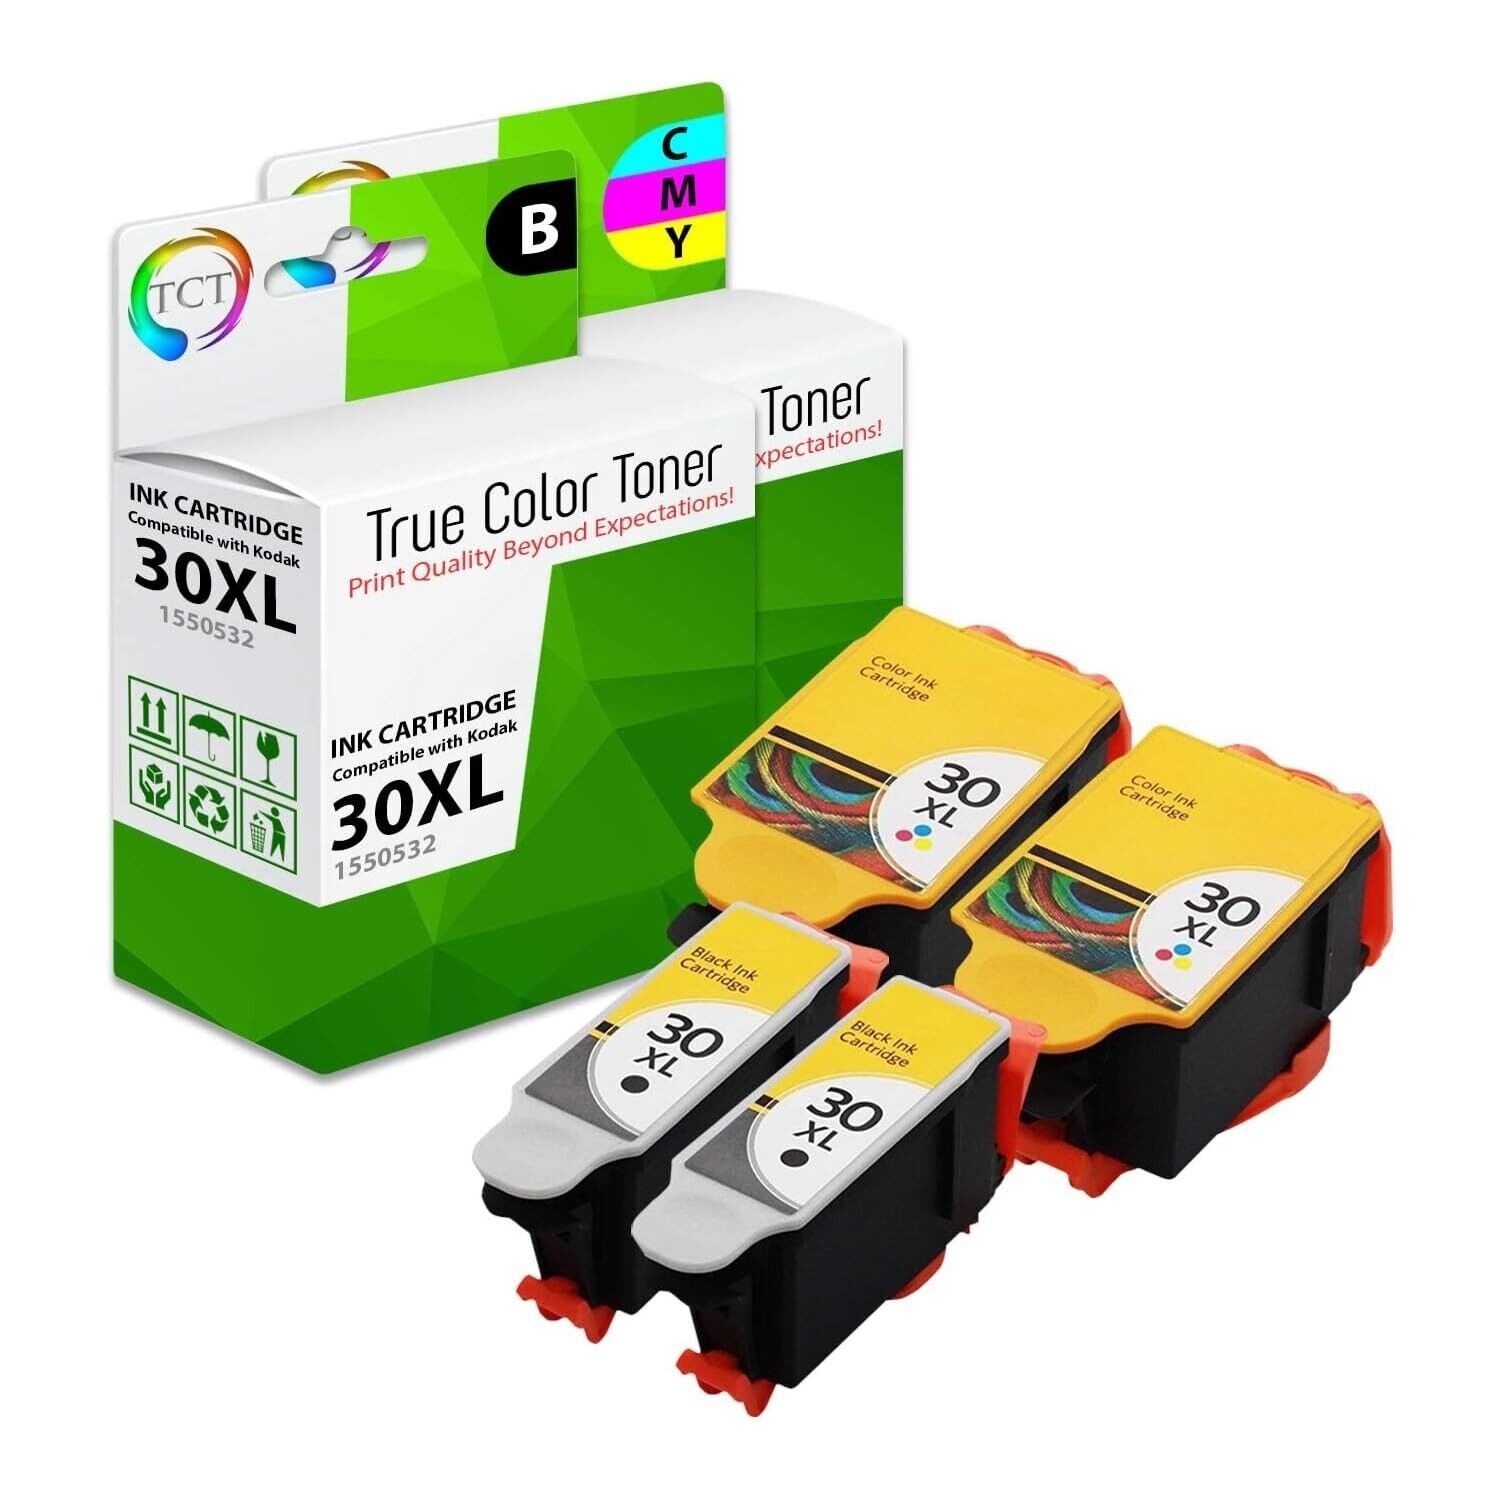 TCT Compatible Ink Cartridge Replacement for Kodak 30XL 30 XL High Yield Work...